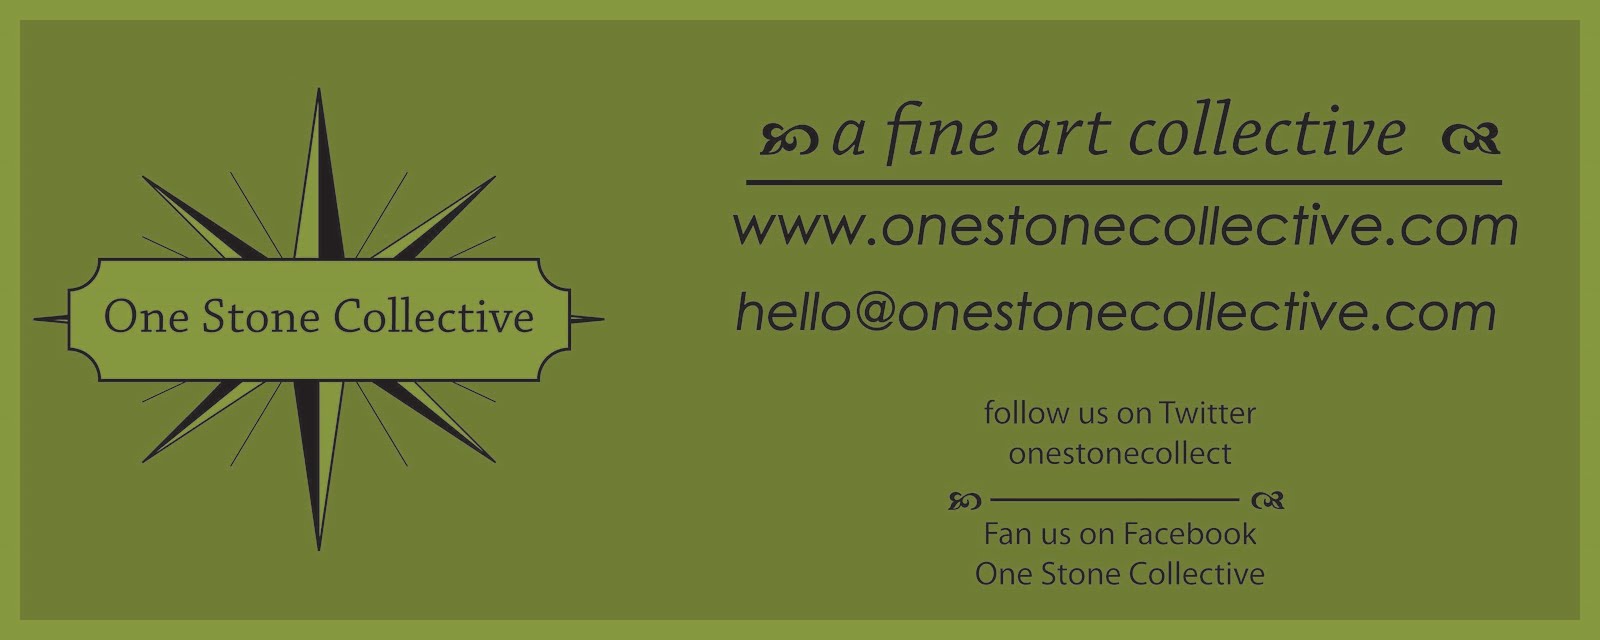 One Stone Collective